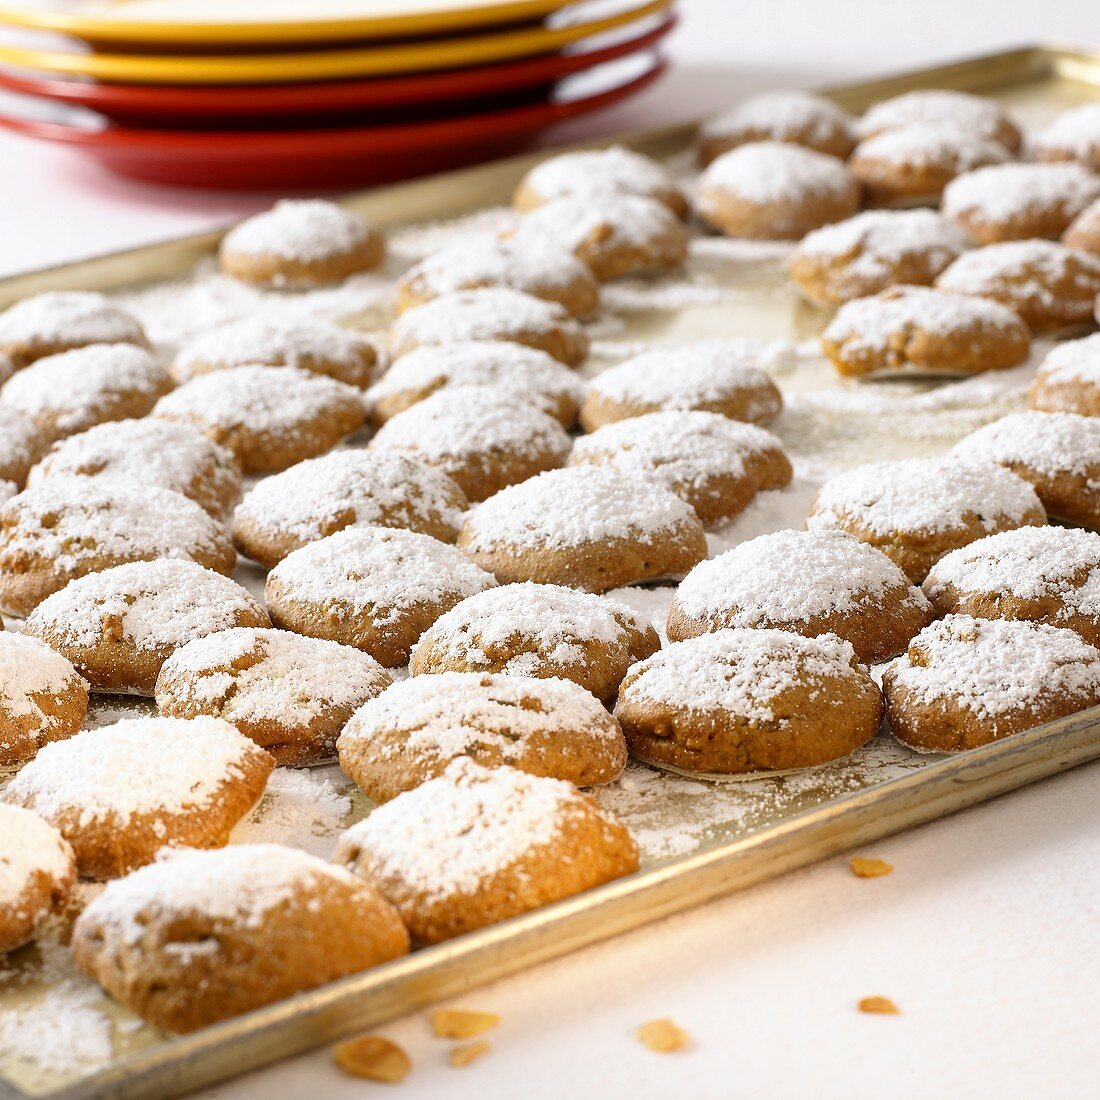 Gingerbread biscuits with icing sugar on baking tray; plate